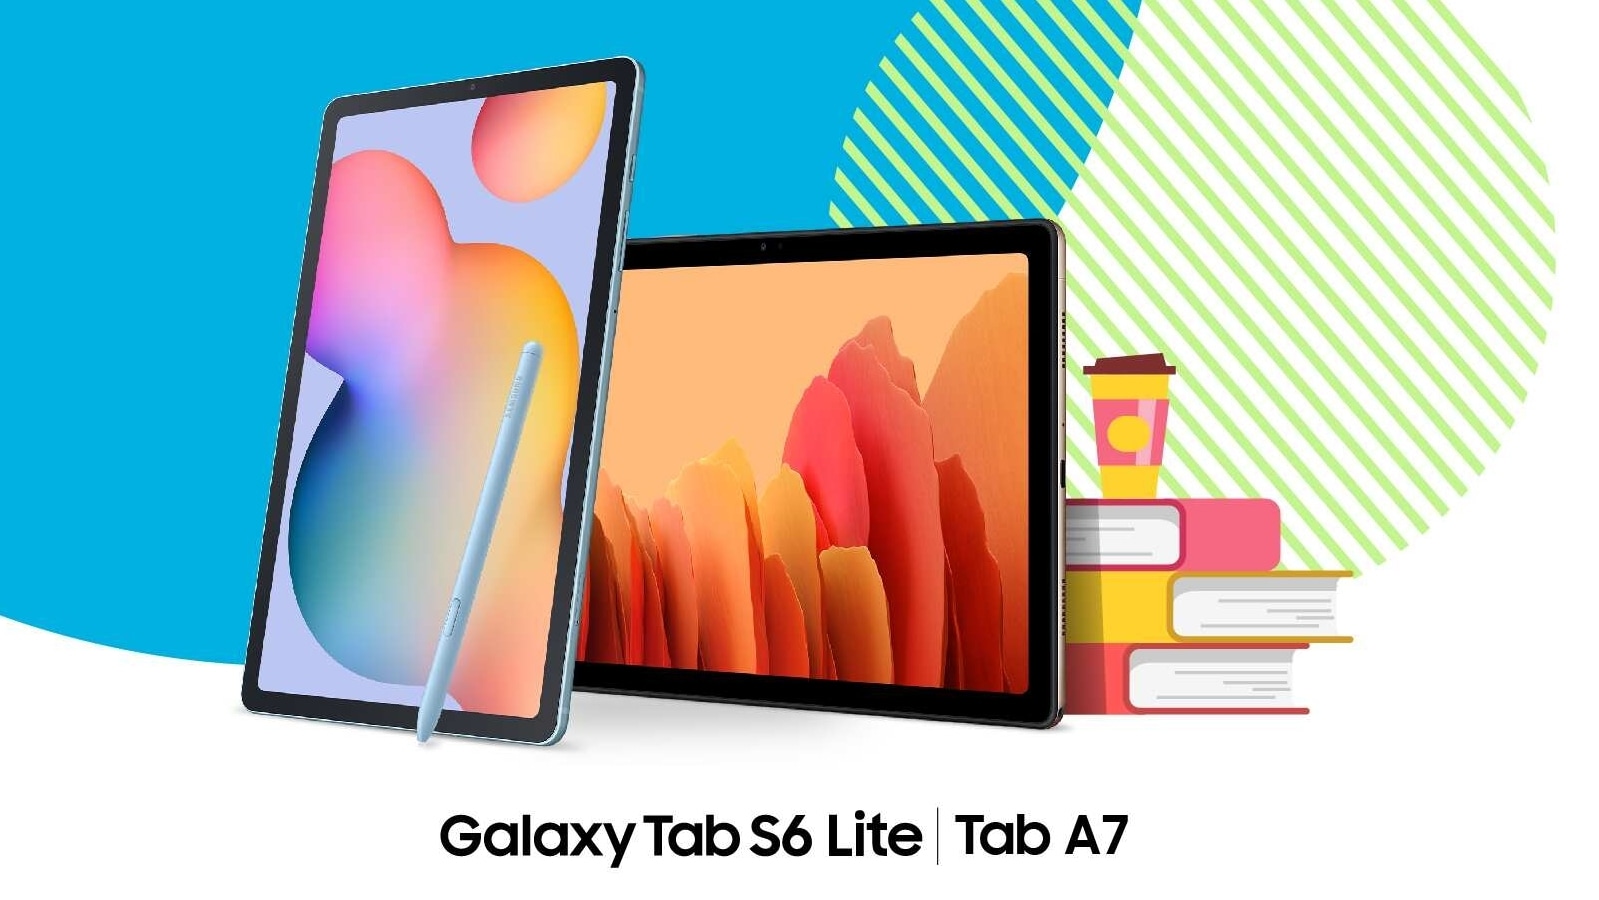 Samsung announces discounts on the purchase of Galaxy Tab S6 Lite, Tab A7, Tab S7, Tab S7+ for students